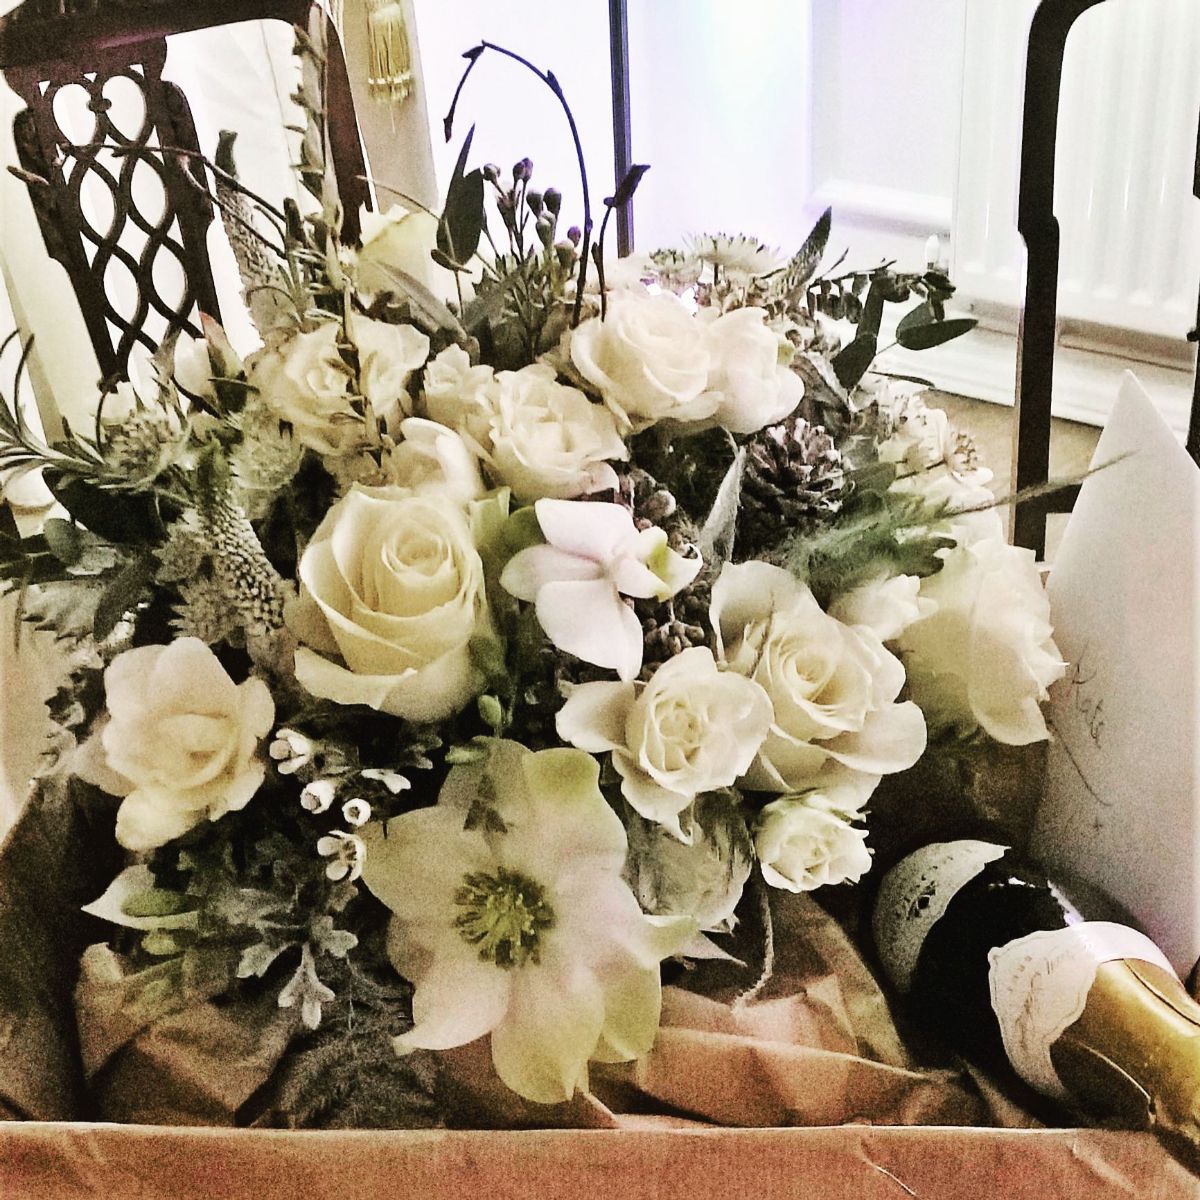 Brides posy of Christmas roses, spary roses, silver grey foliages, freesia and herbs